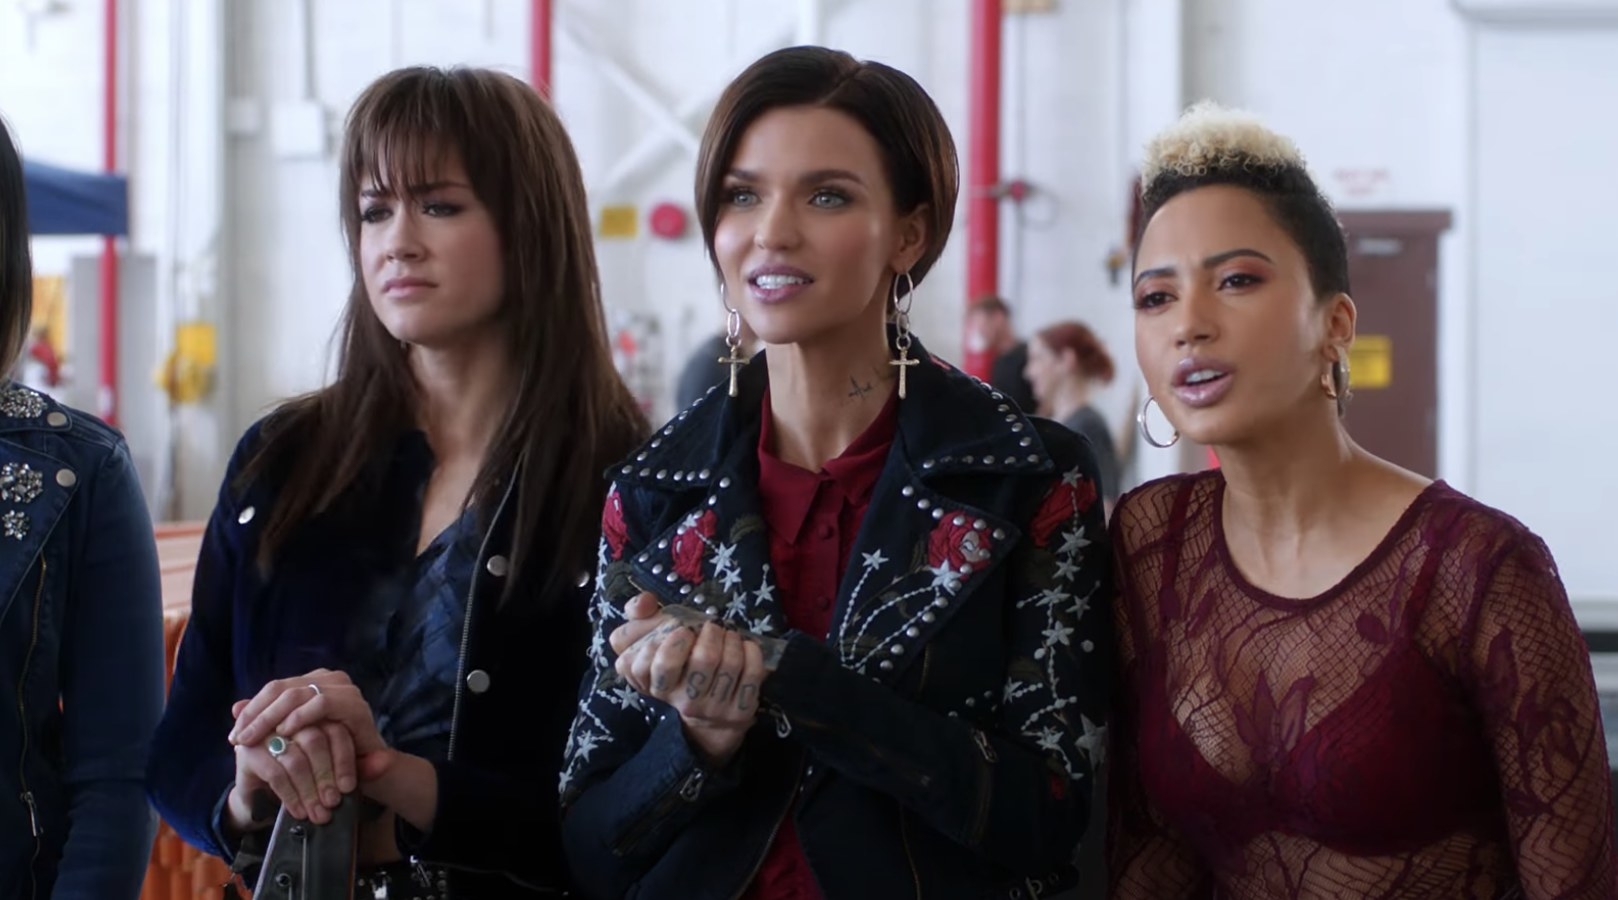 Ruby Rose with two female bandmates.